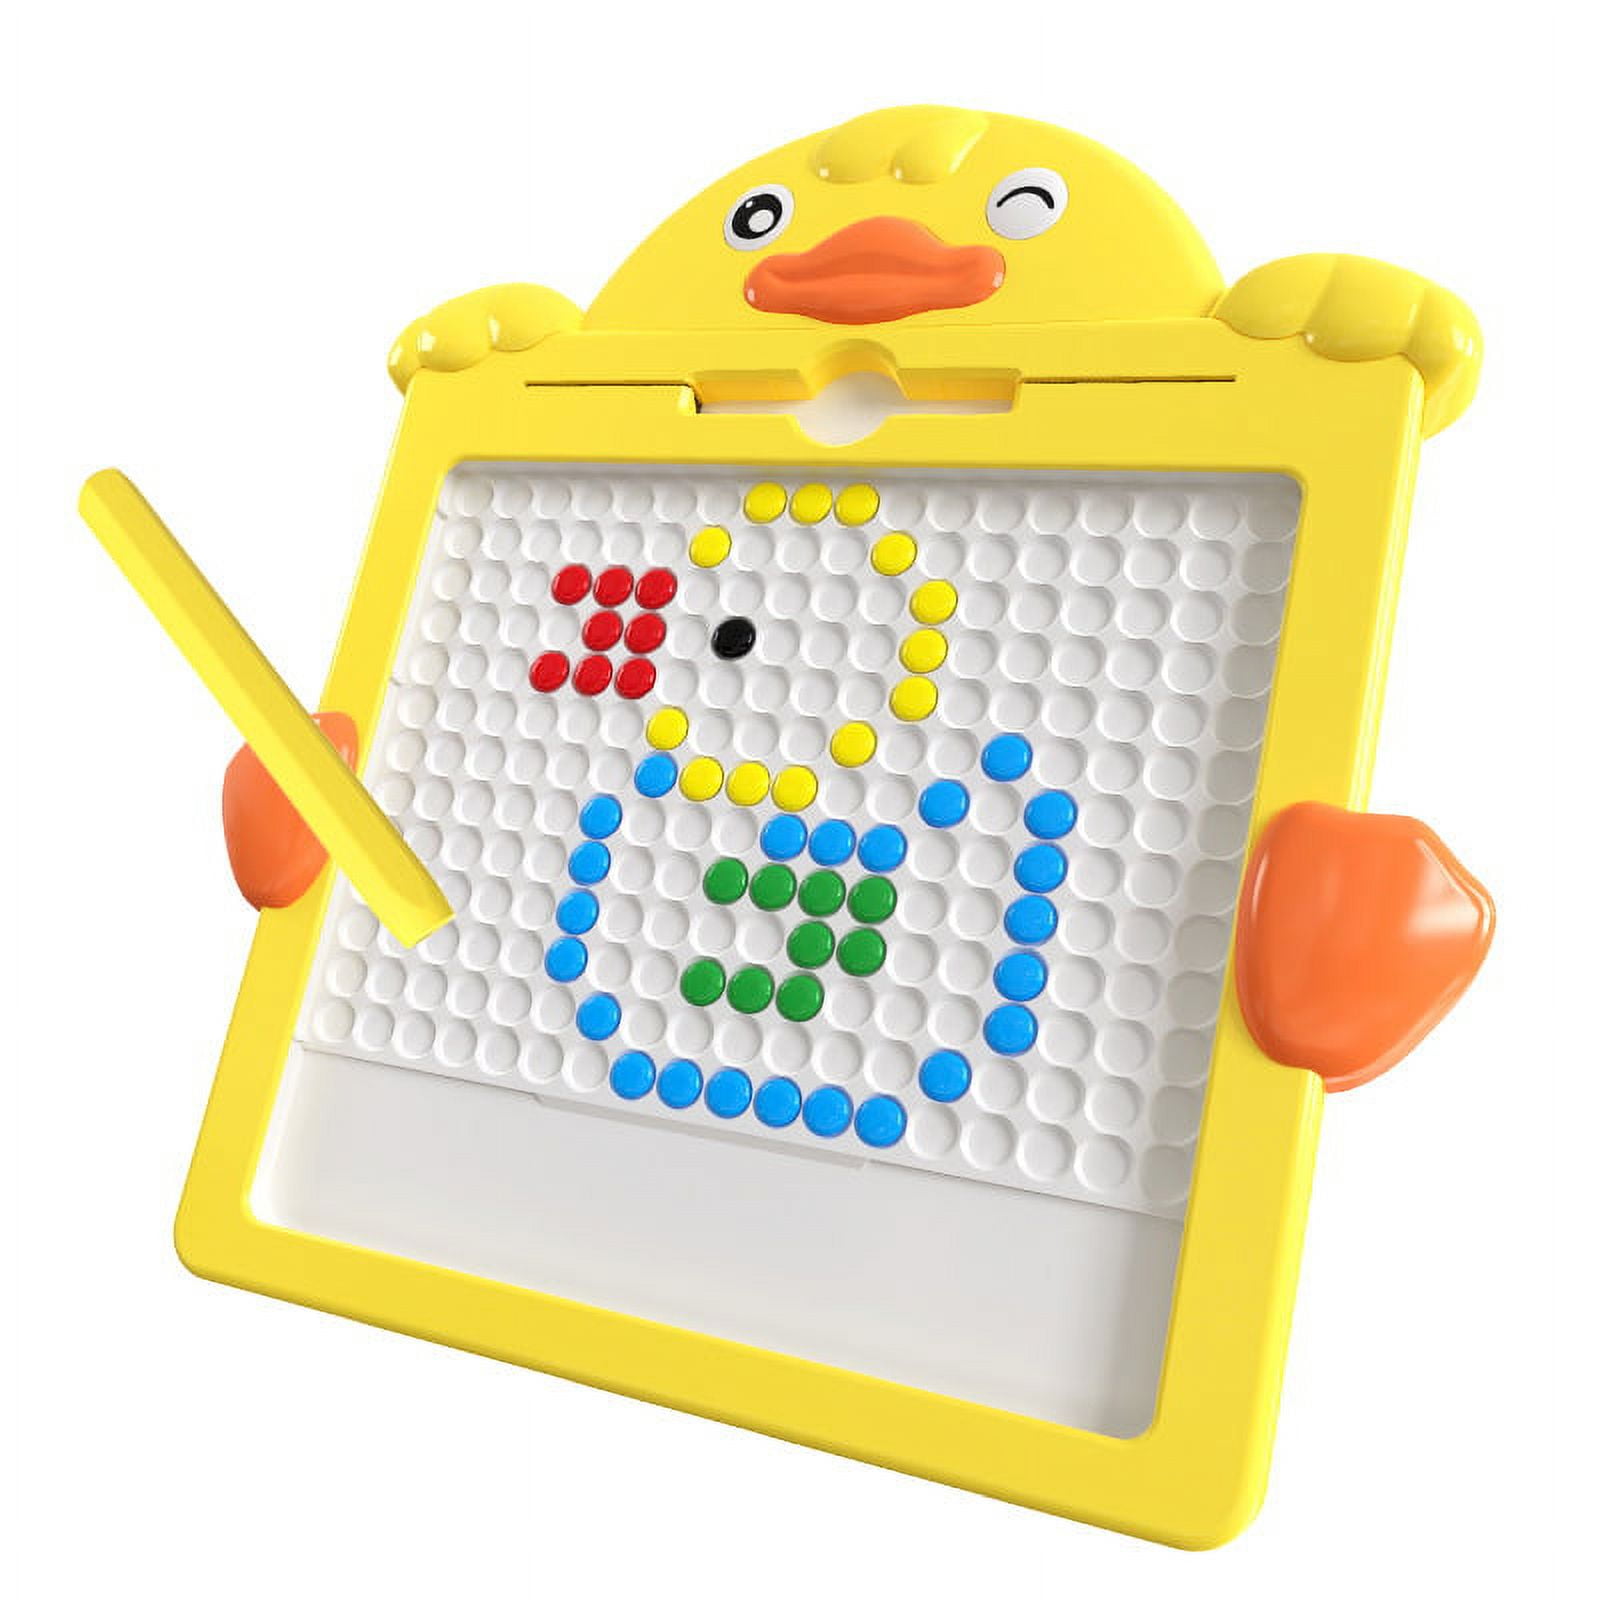 Magnetic Drawing Board Toddler Toys For Boys Girls, 17 Inch